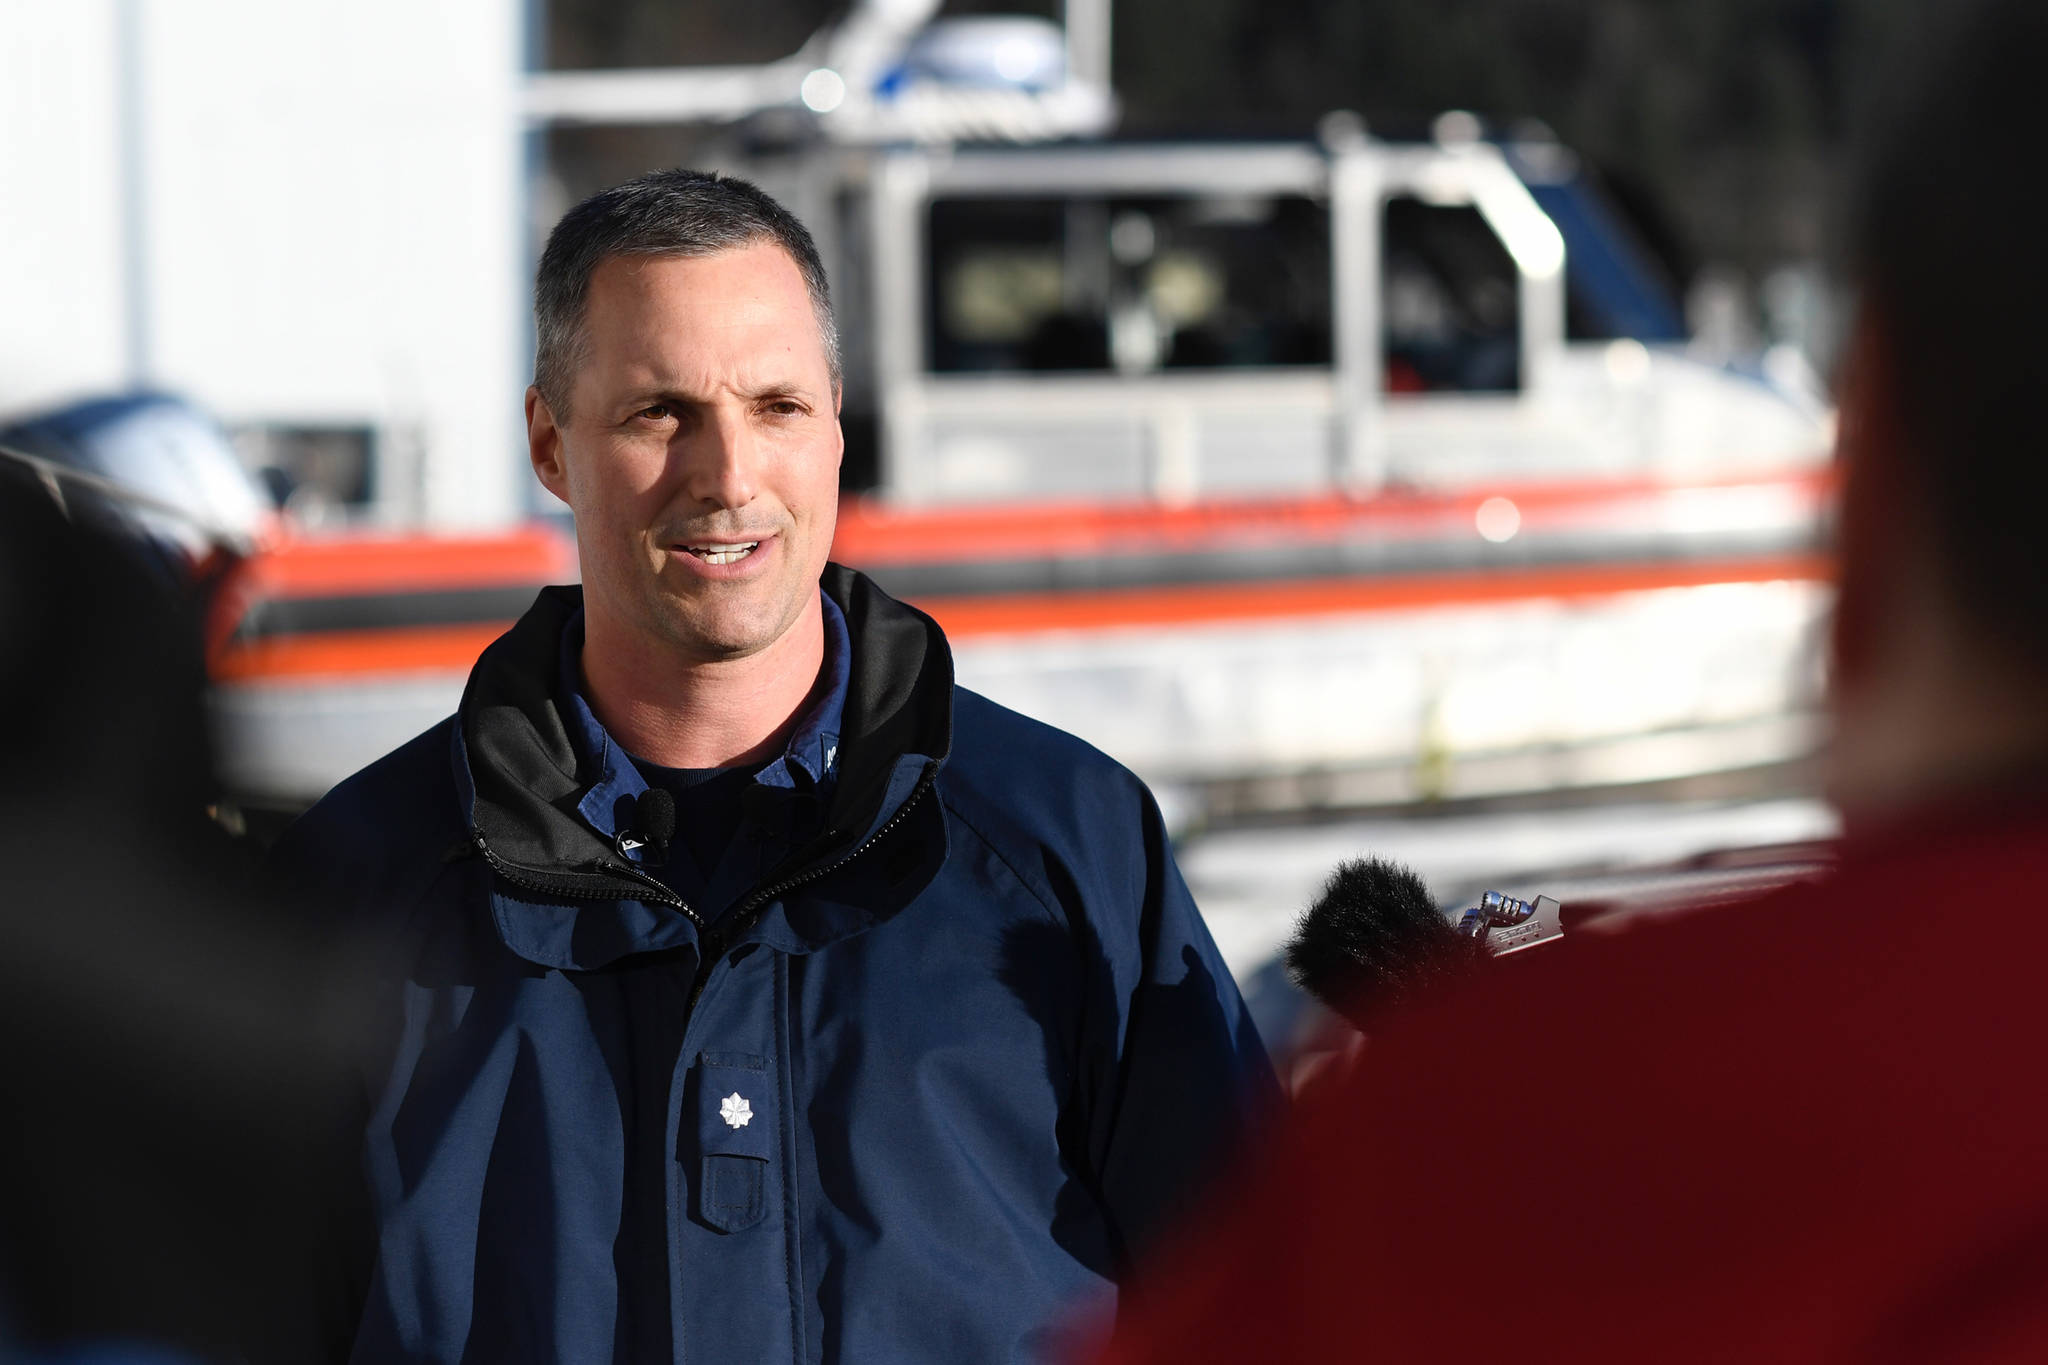 Commander Michael Kahle, of the U.S. Coast Guard, speaks during a press conference on Thursday, Jan. 31, 2019, at Coast Guard Station Juneau about the search for a missing plane near Kake. (Michael Penn | Juneau Empire)